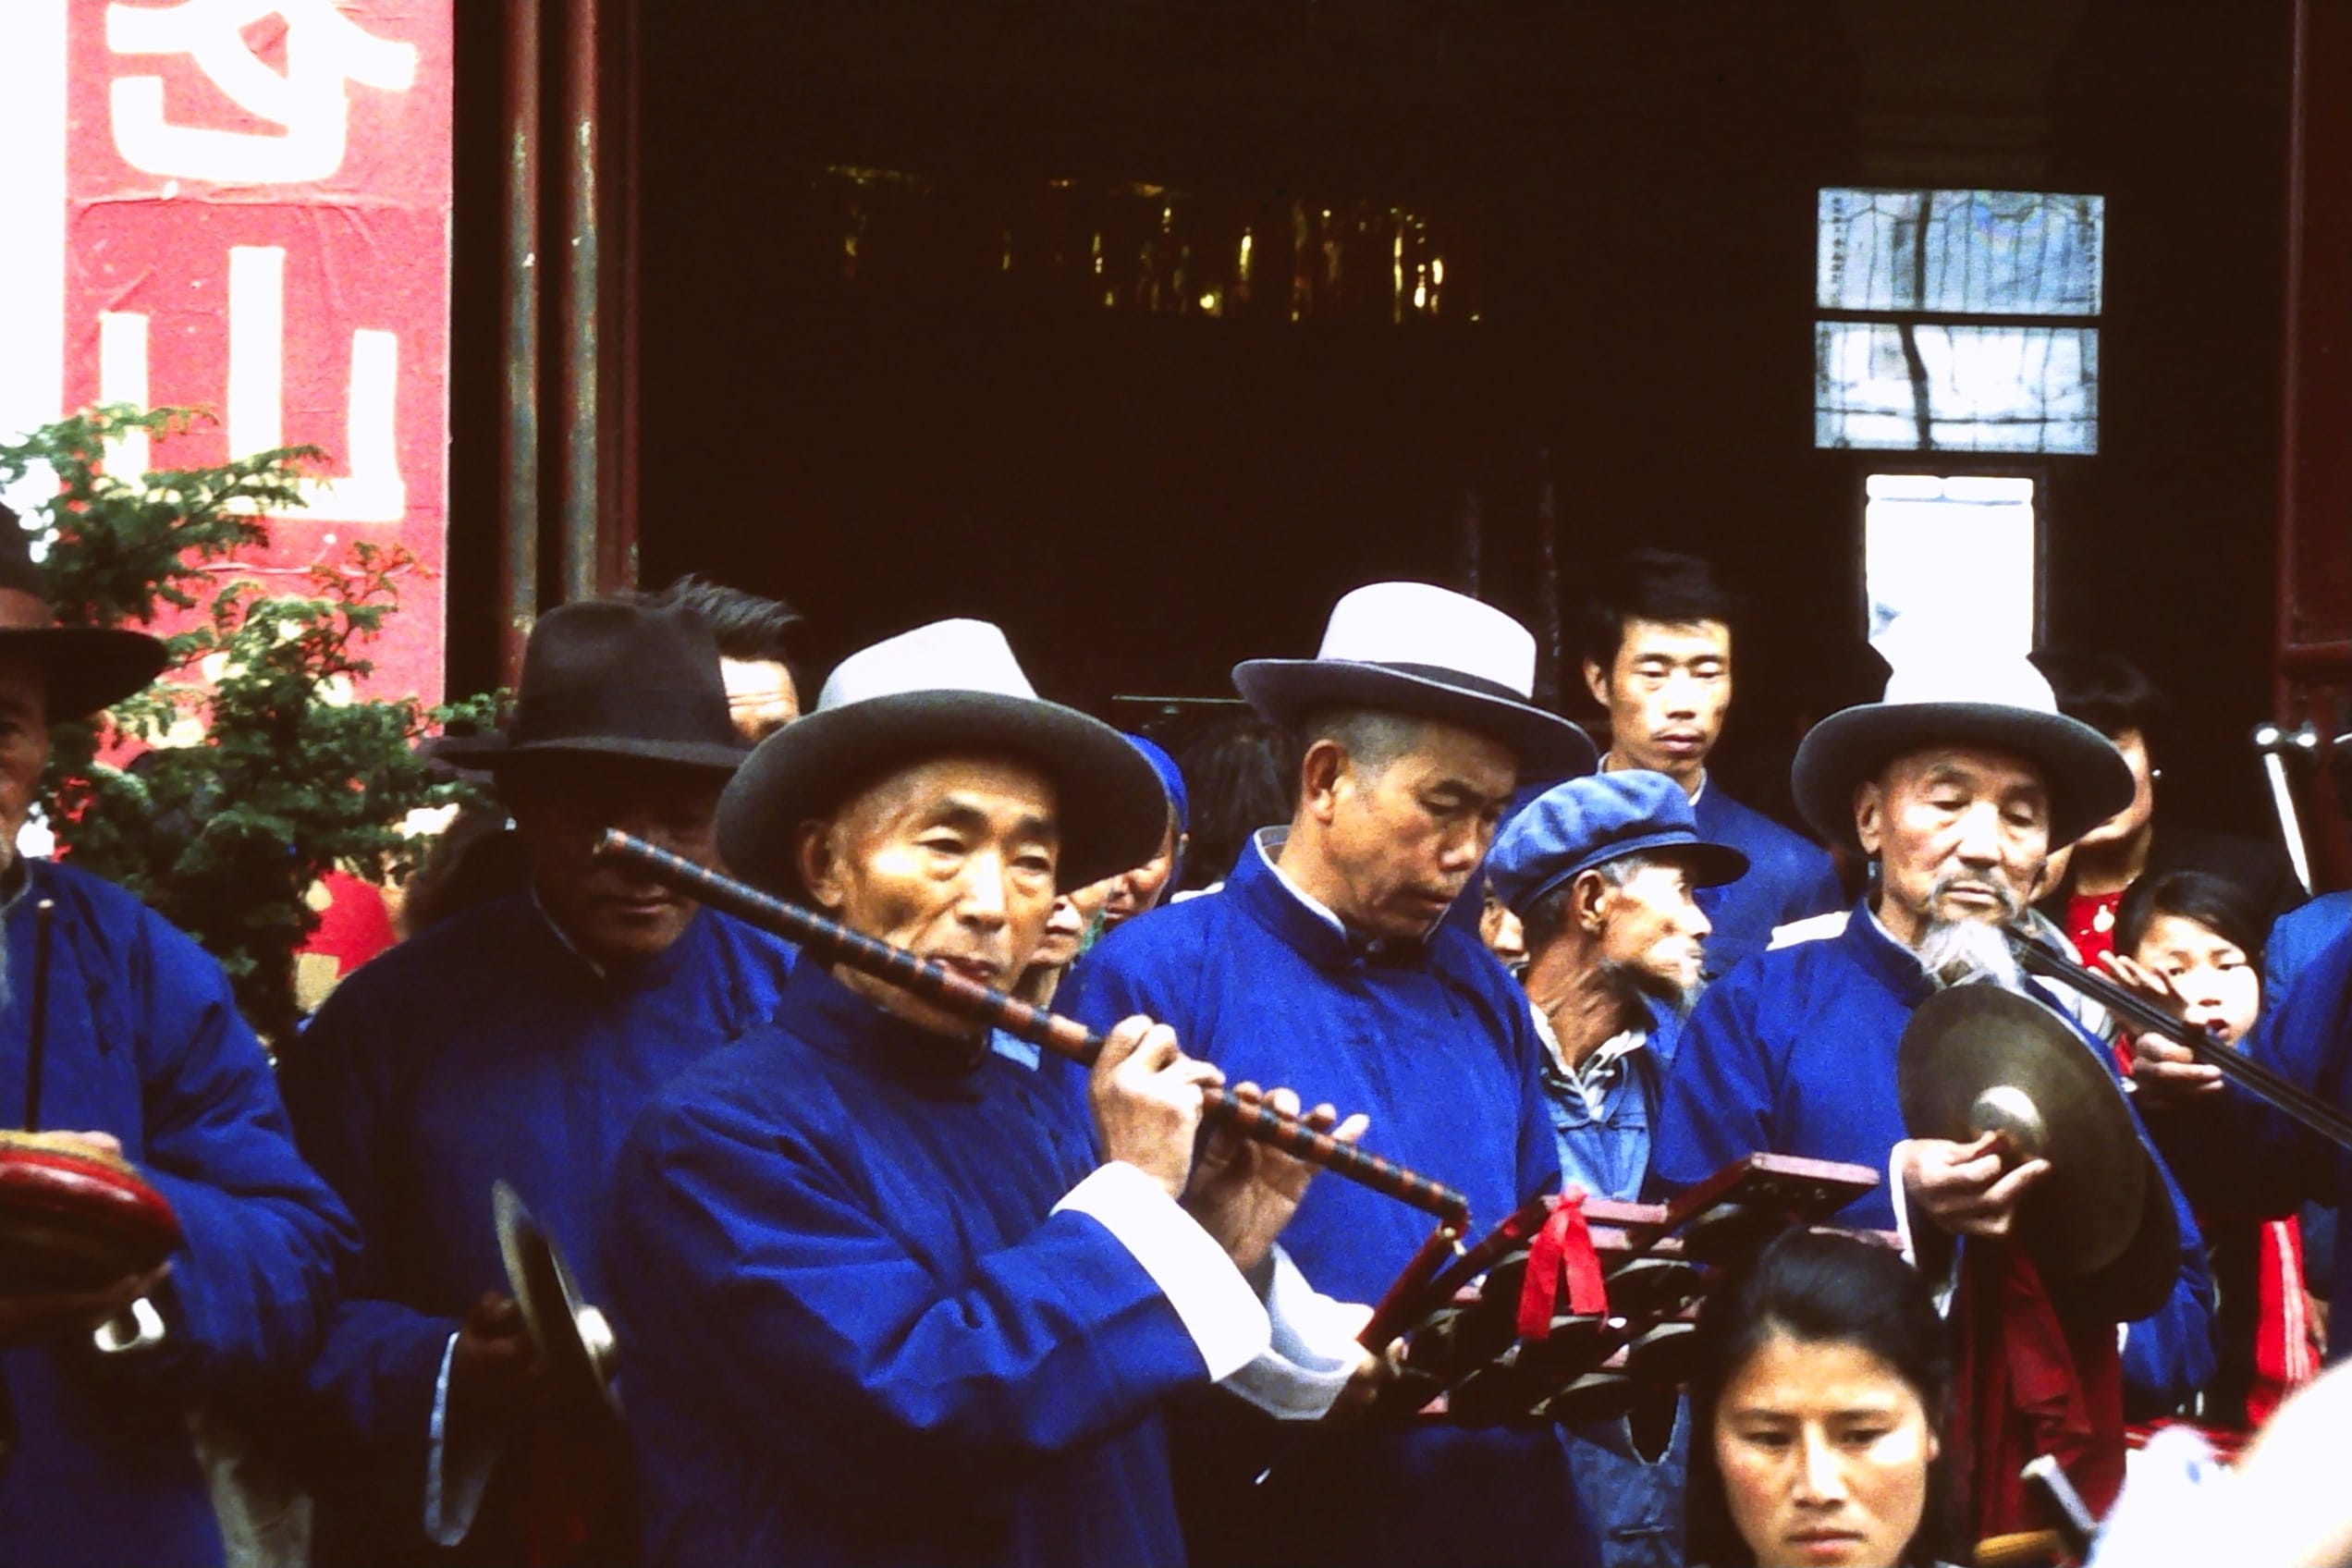 Band of musicians Dali Chinese new year each wearing traditional dyed indigo clothes.